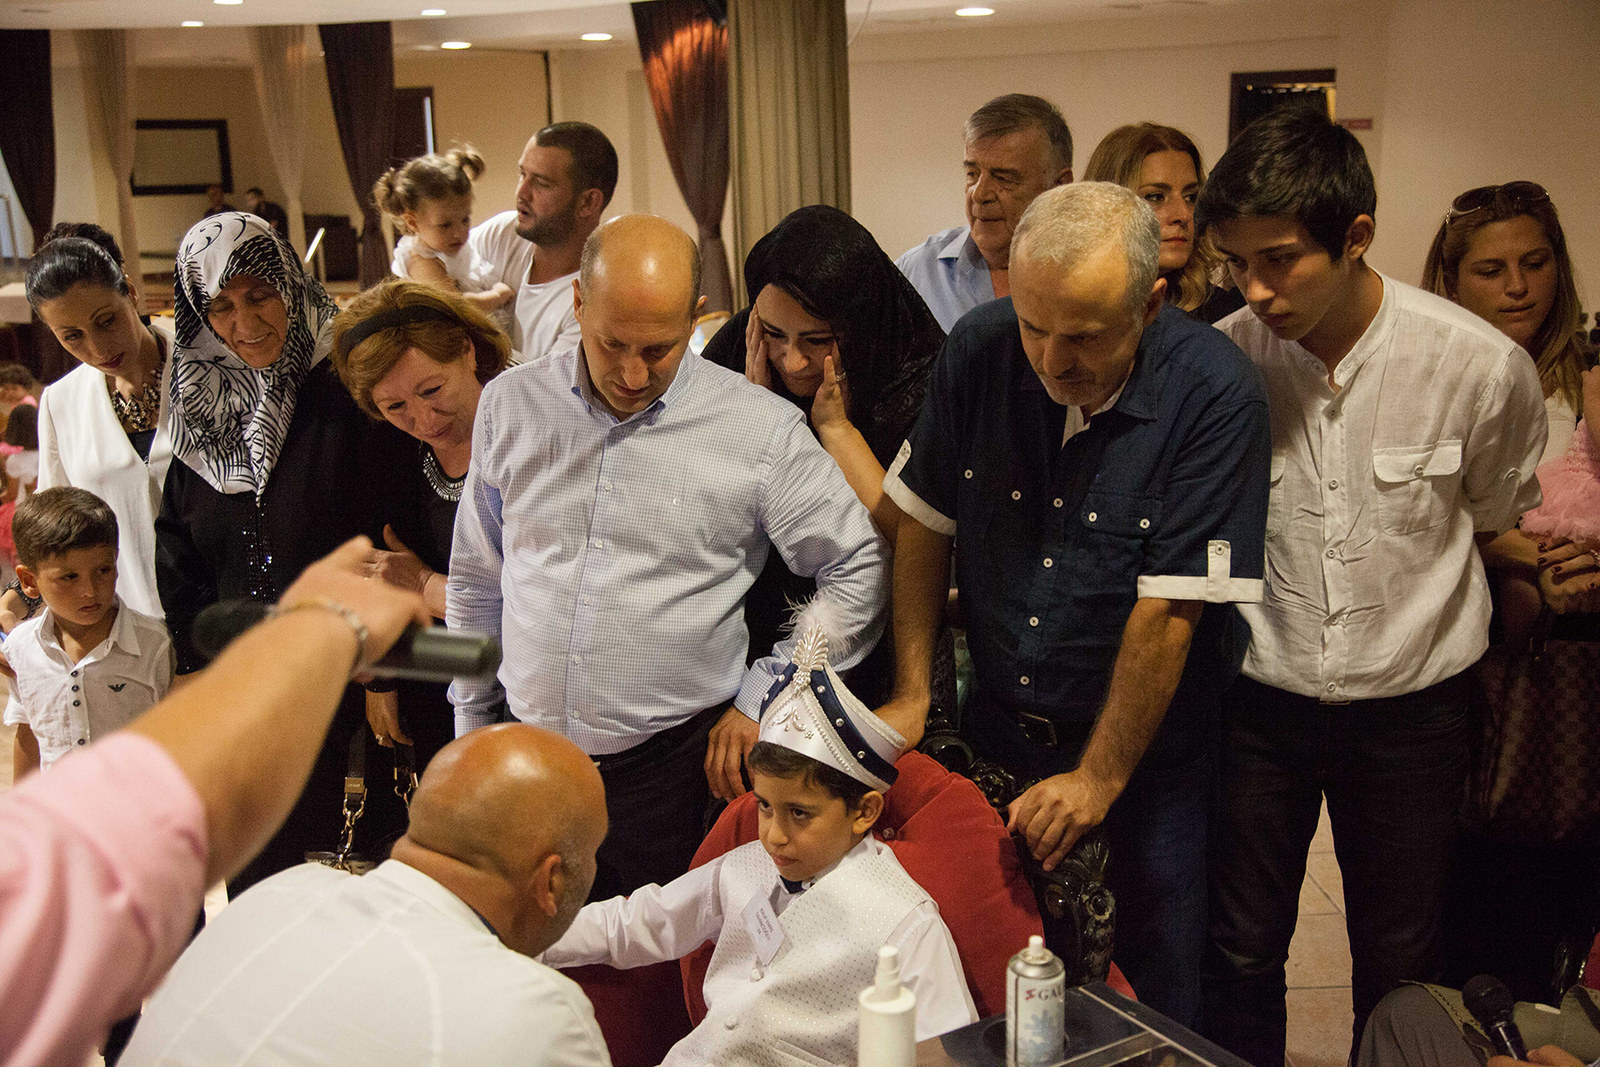 Circumcision Parties Are A Rite Of Passage In Turkey